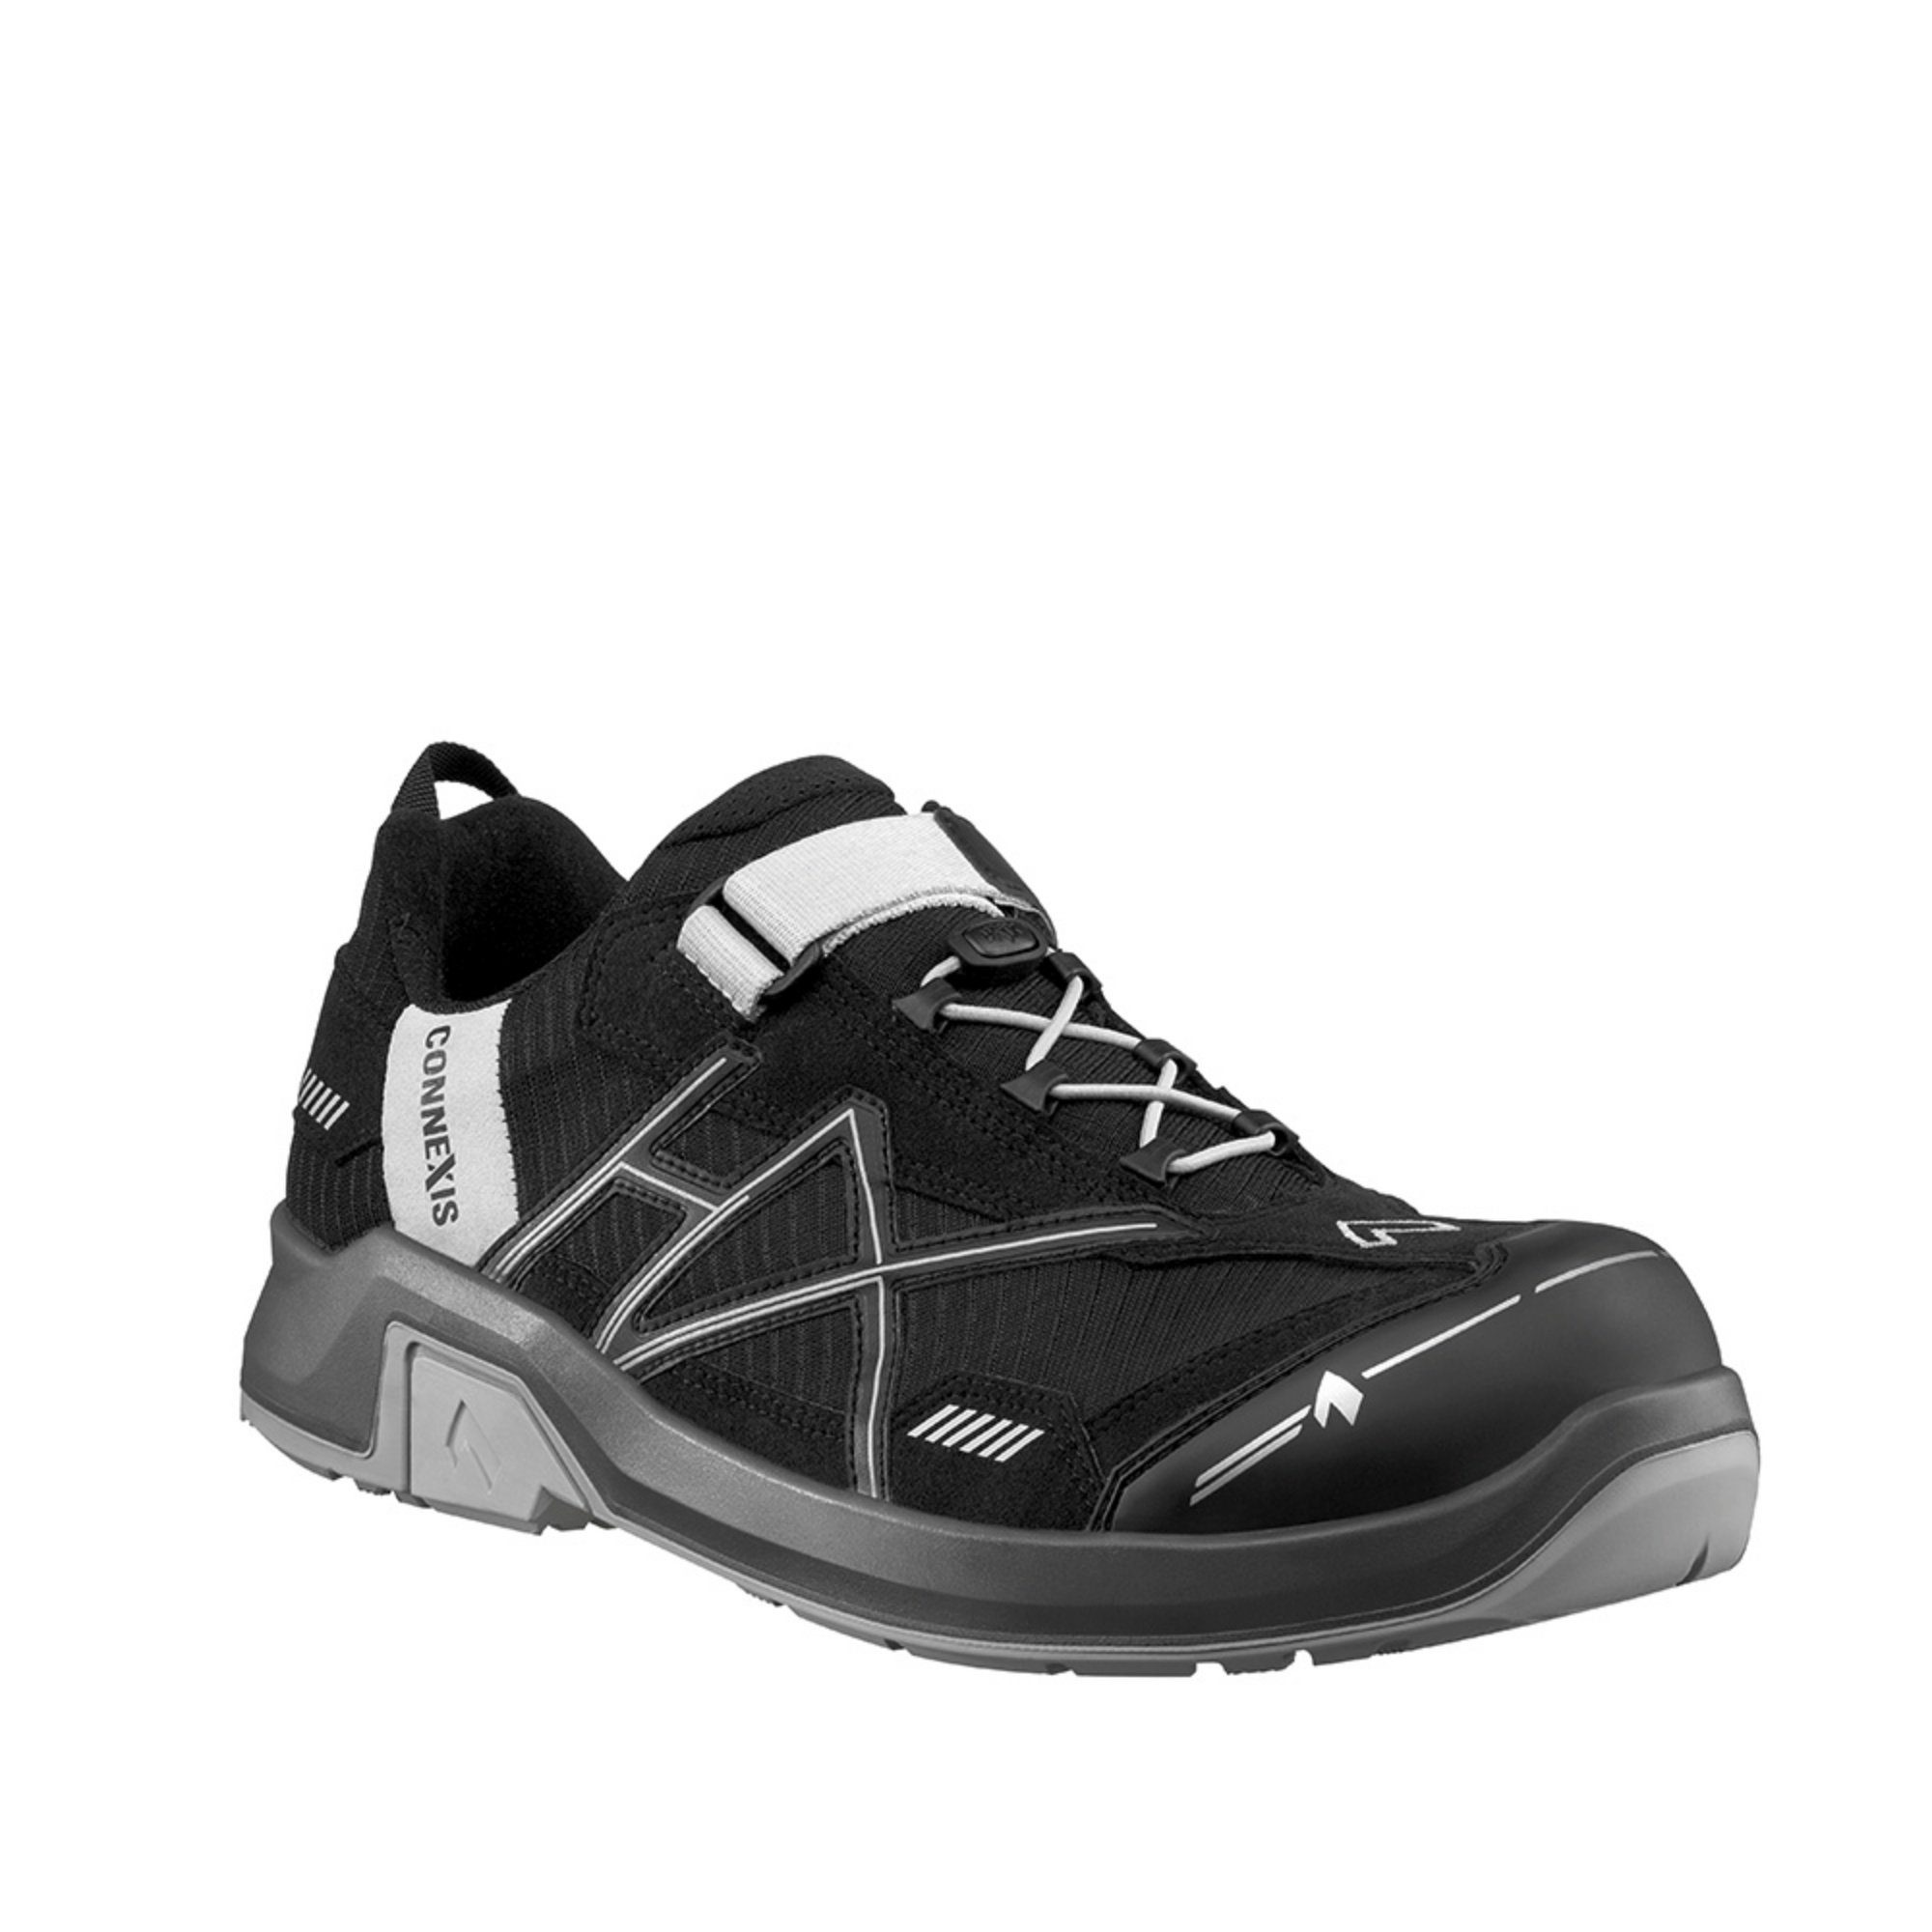 (1-tlg) CONNEXIS Safety Arbeitsschuh haix LOW T